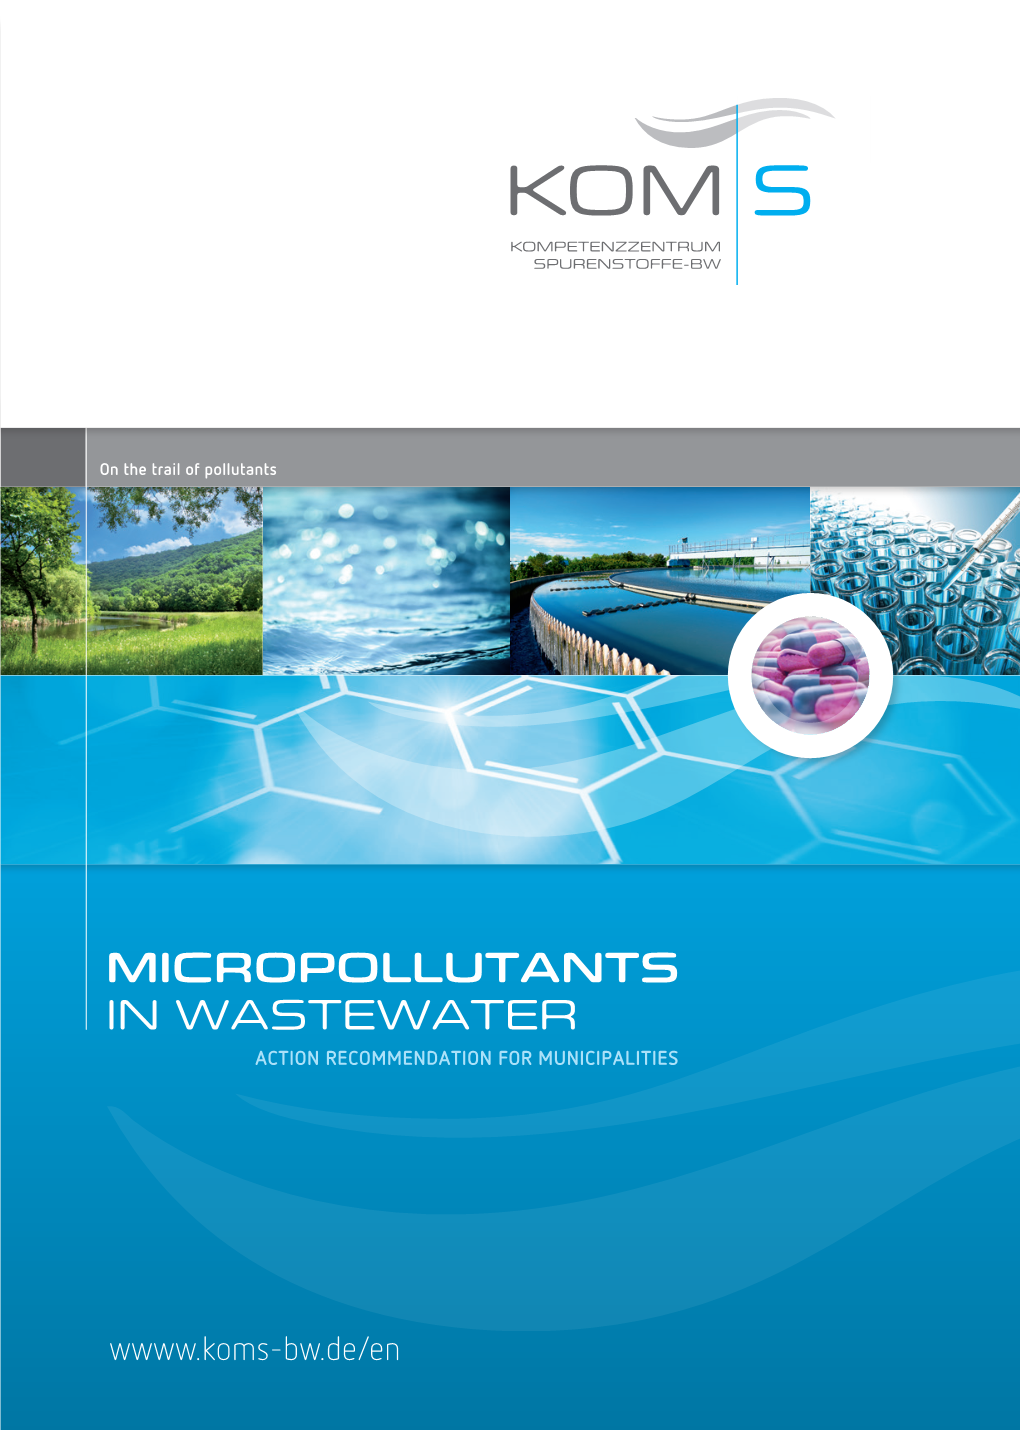 Micropollutants in Wastewater Action Recommendation for Municipalities